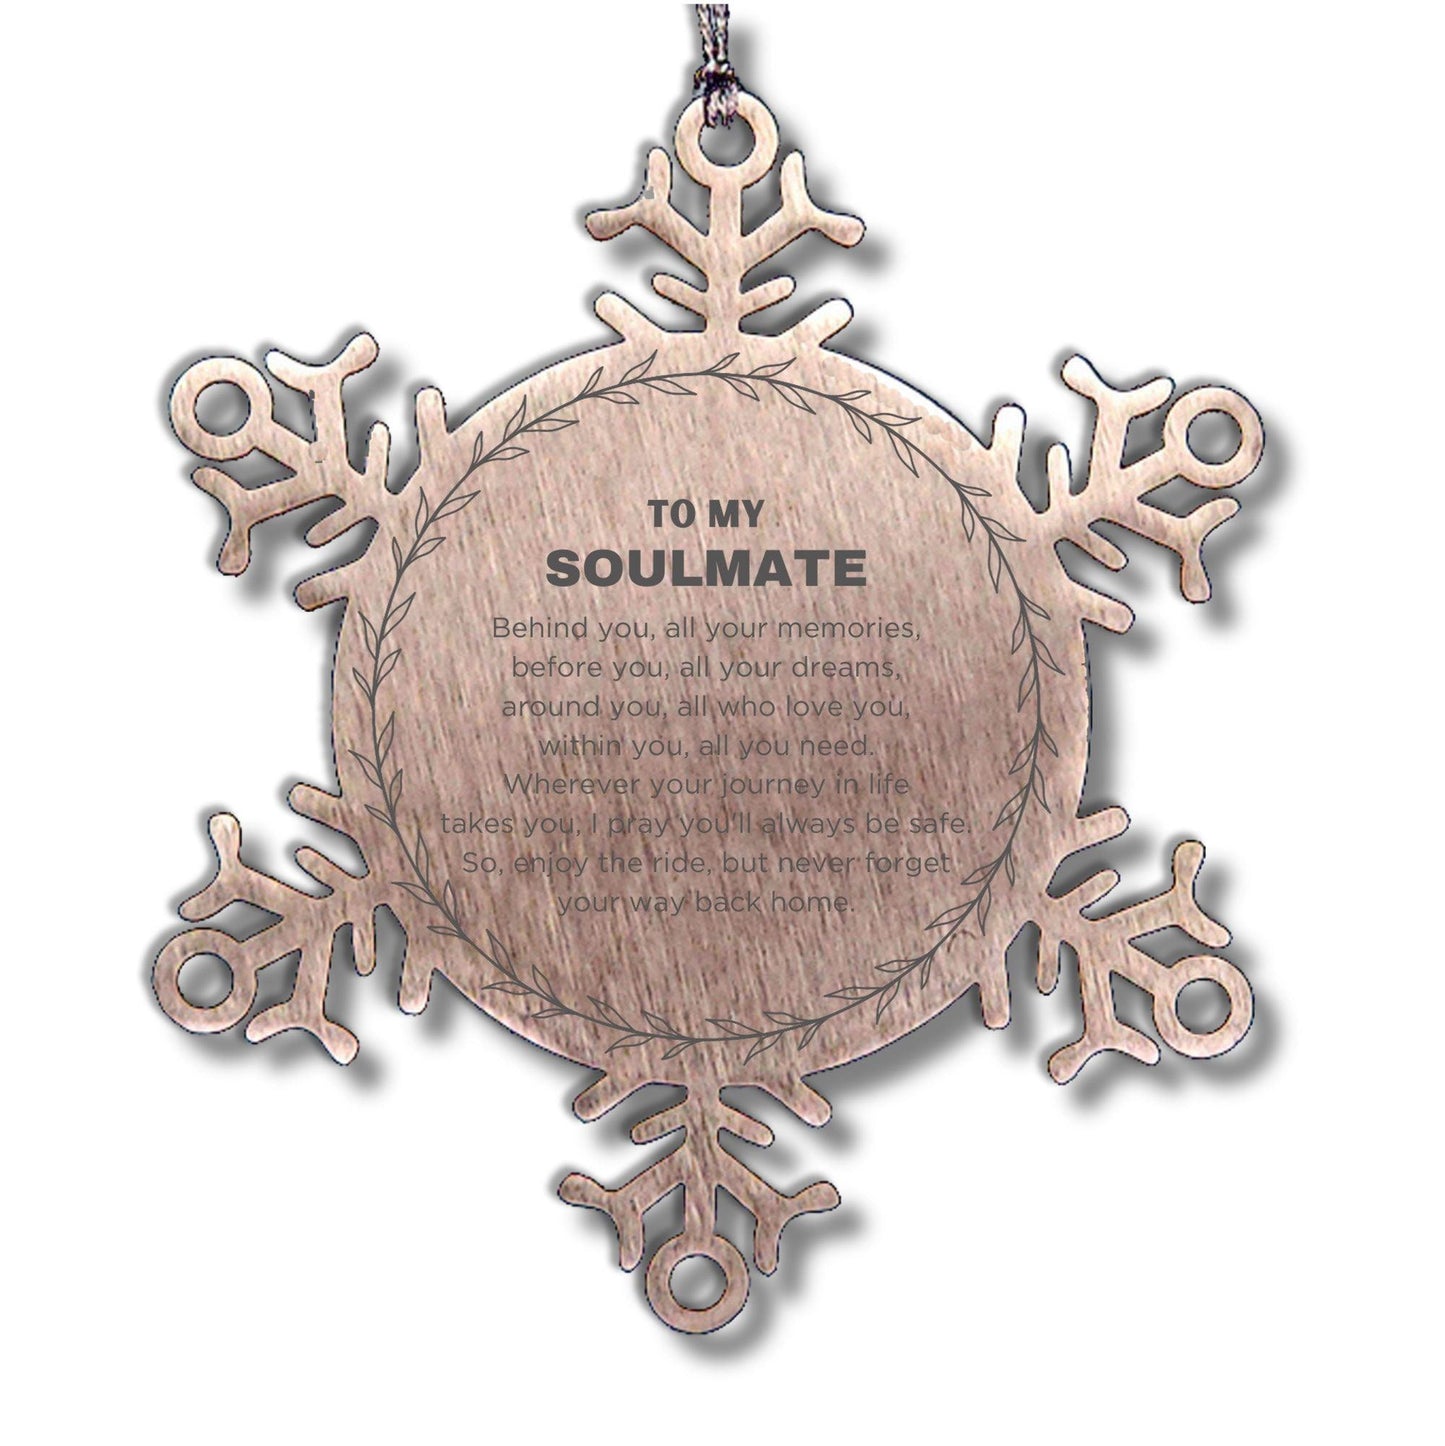 Inspirational Soulmate Snowflake Engraved Ornament - Behind you, all your Memories, Before you, all your Dreams - Birthday, Christmas Holiday Gifts - Mallard Moon Gift Shop